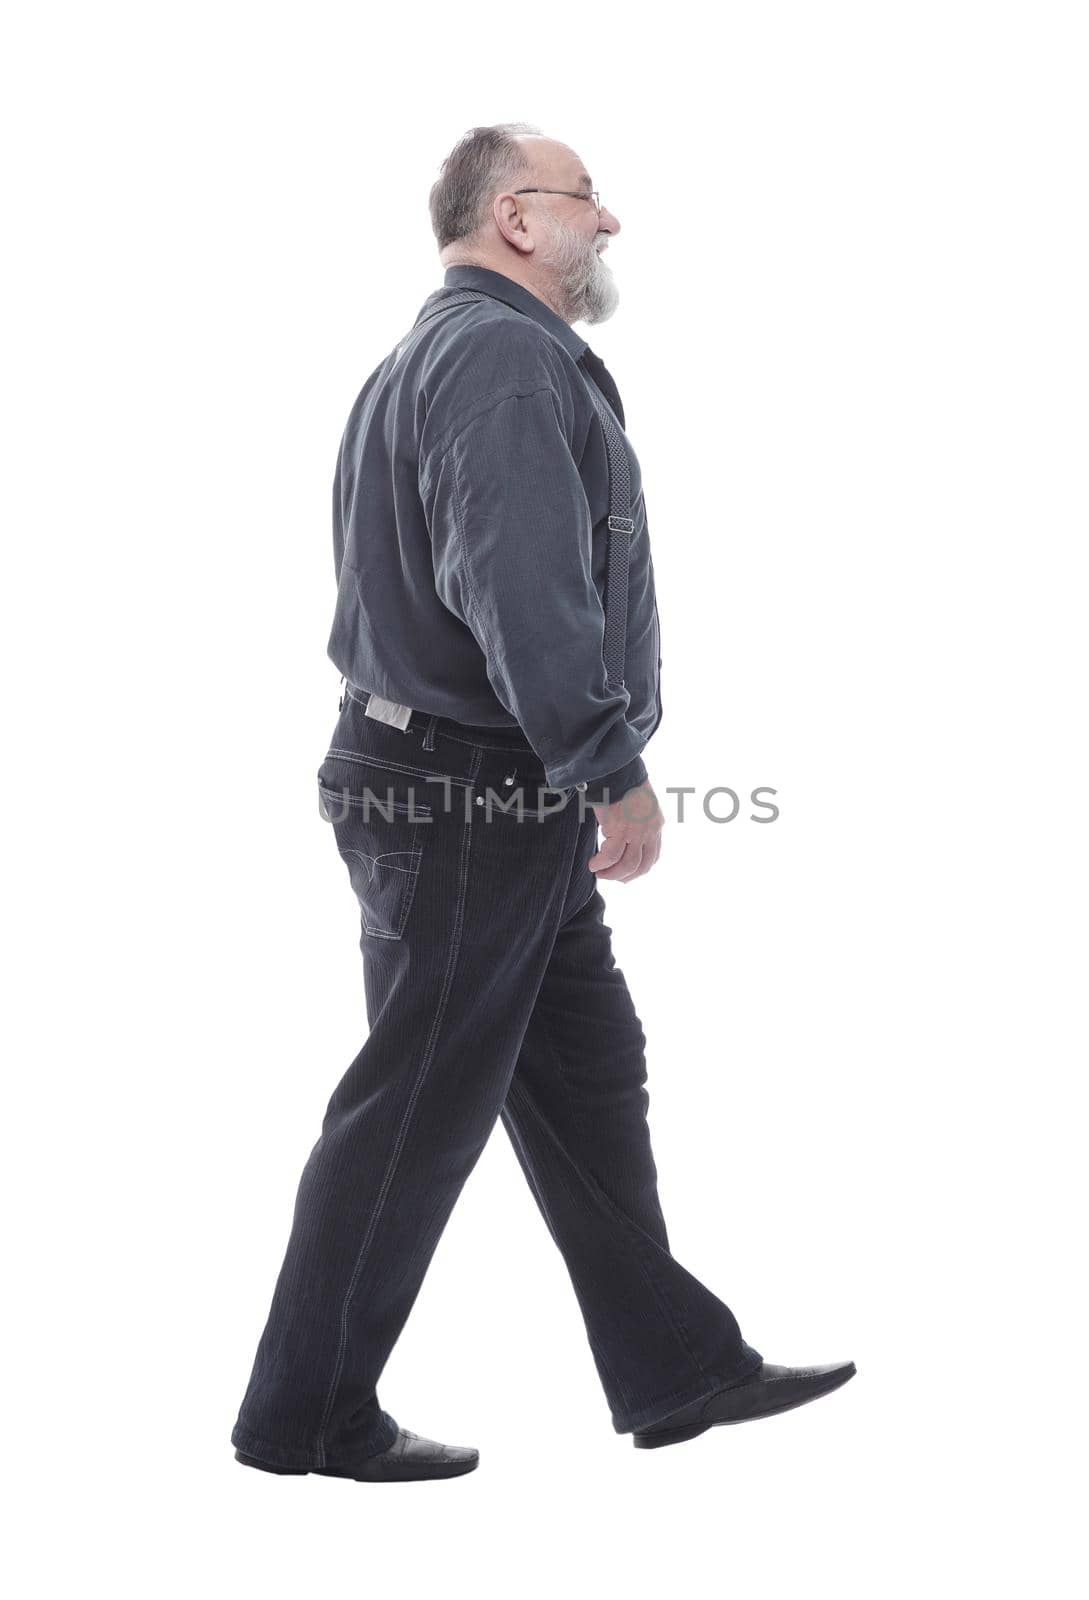 in full growth. happy bearded man striding forward. isolated on a white background